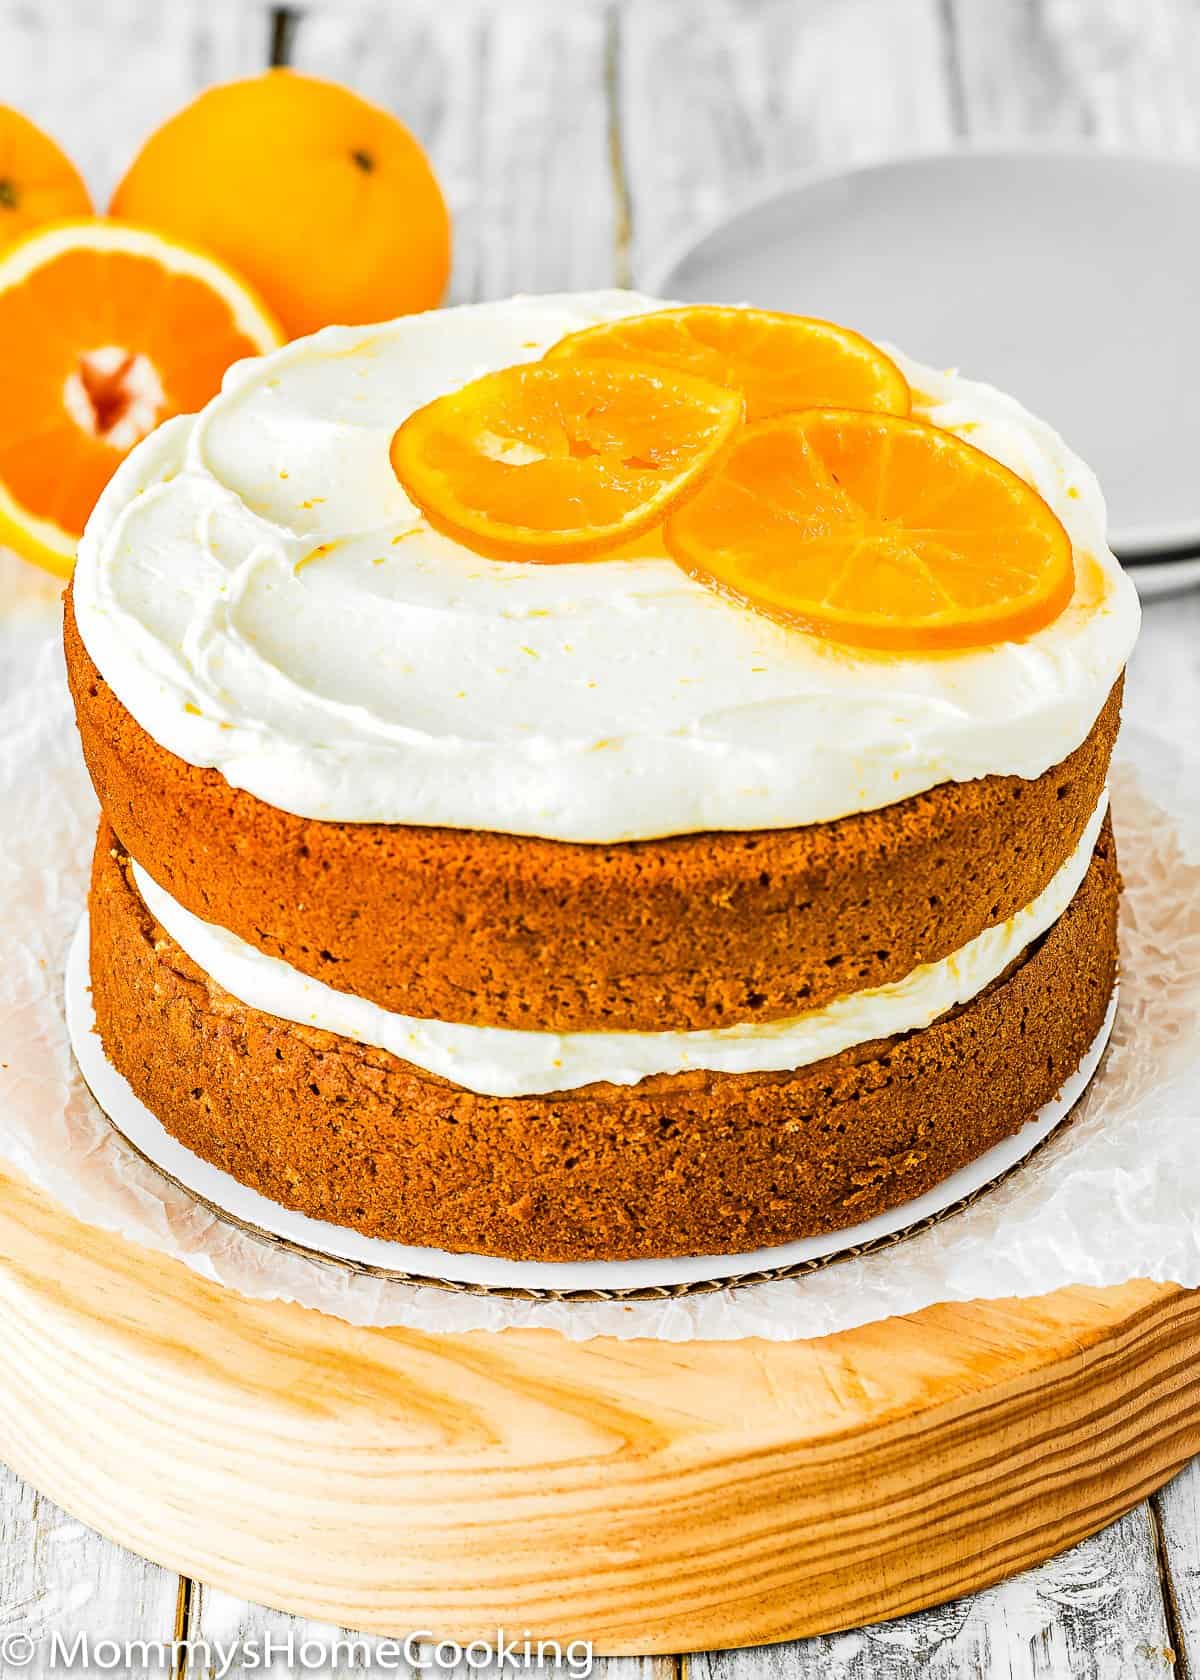 Eggless Orange Cake with orange frosting and candied oranges on top